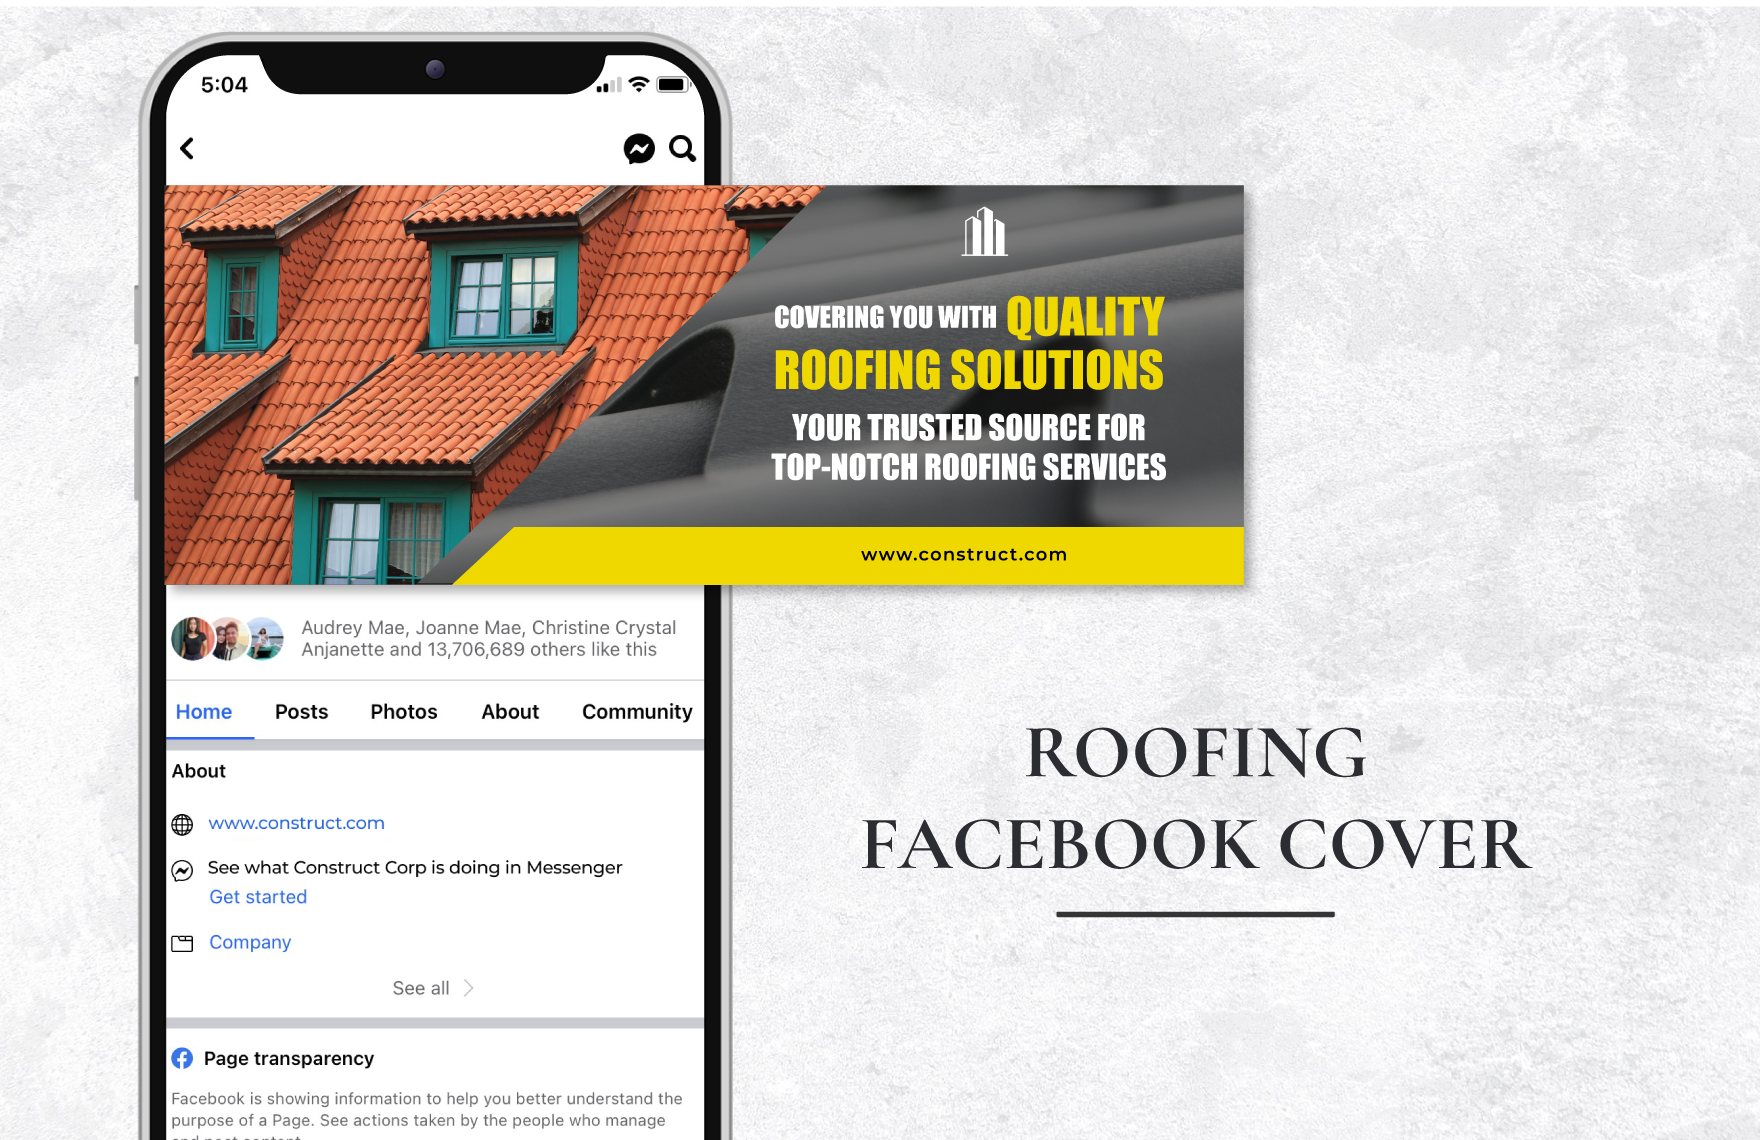 Roofing Facebook Cover